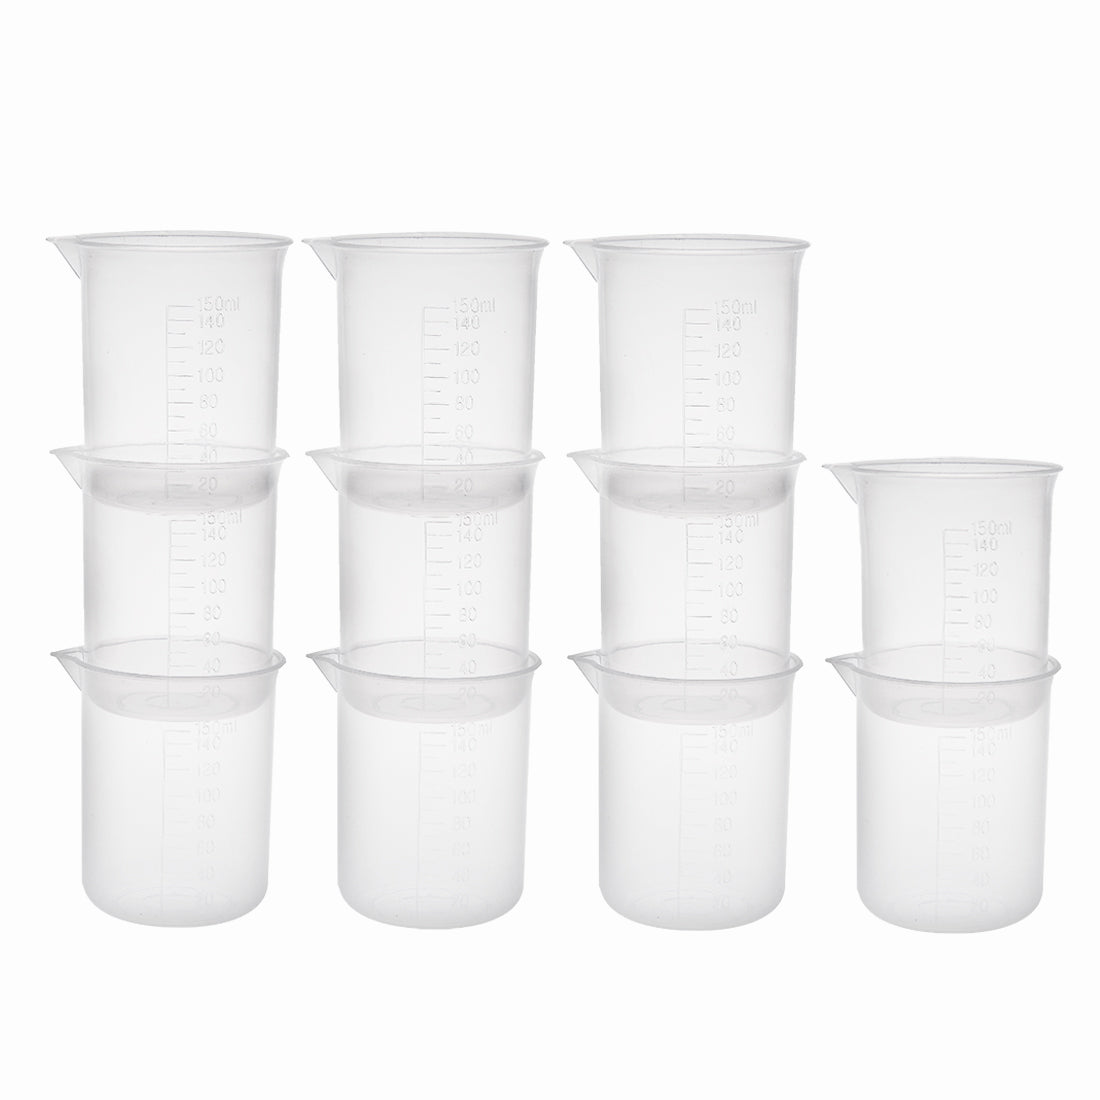 uxcell Uxcell 11pcs Measuring Cup Lab PP Graduated Beaker 150ml